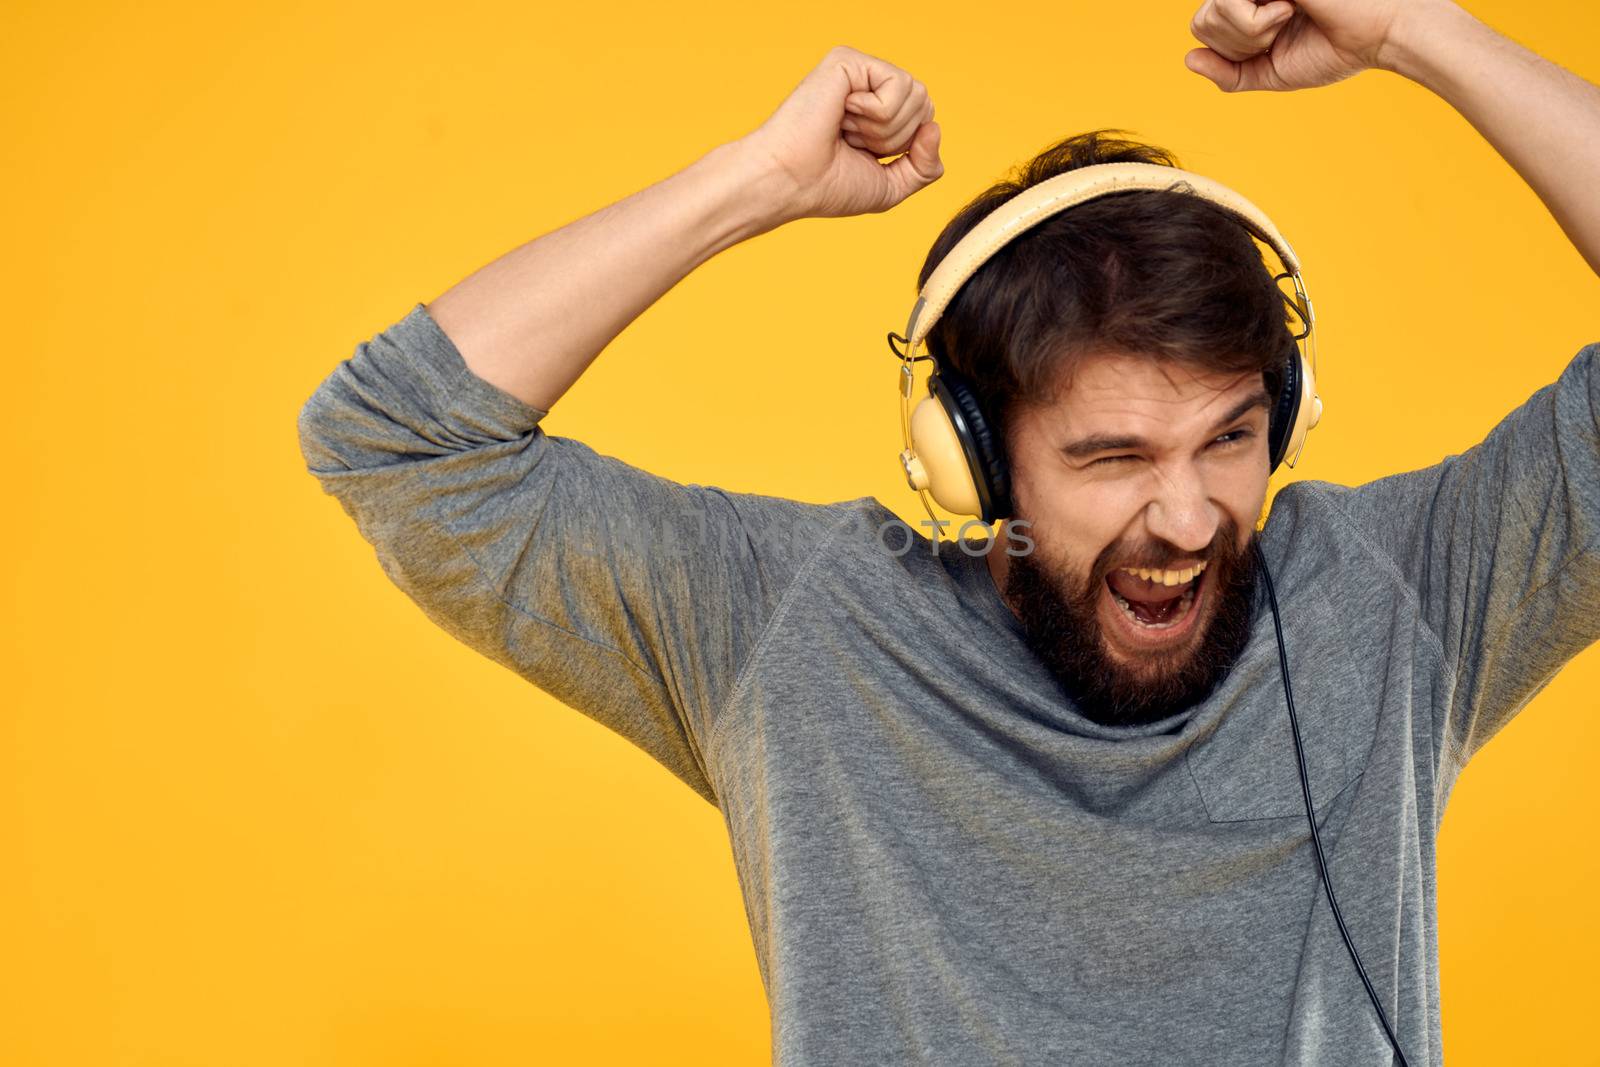 Man with headphones music lifestyle lifestyle technology yellow background. High quality photo